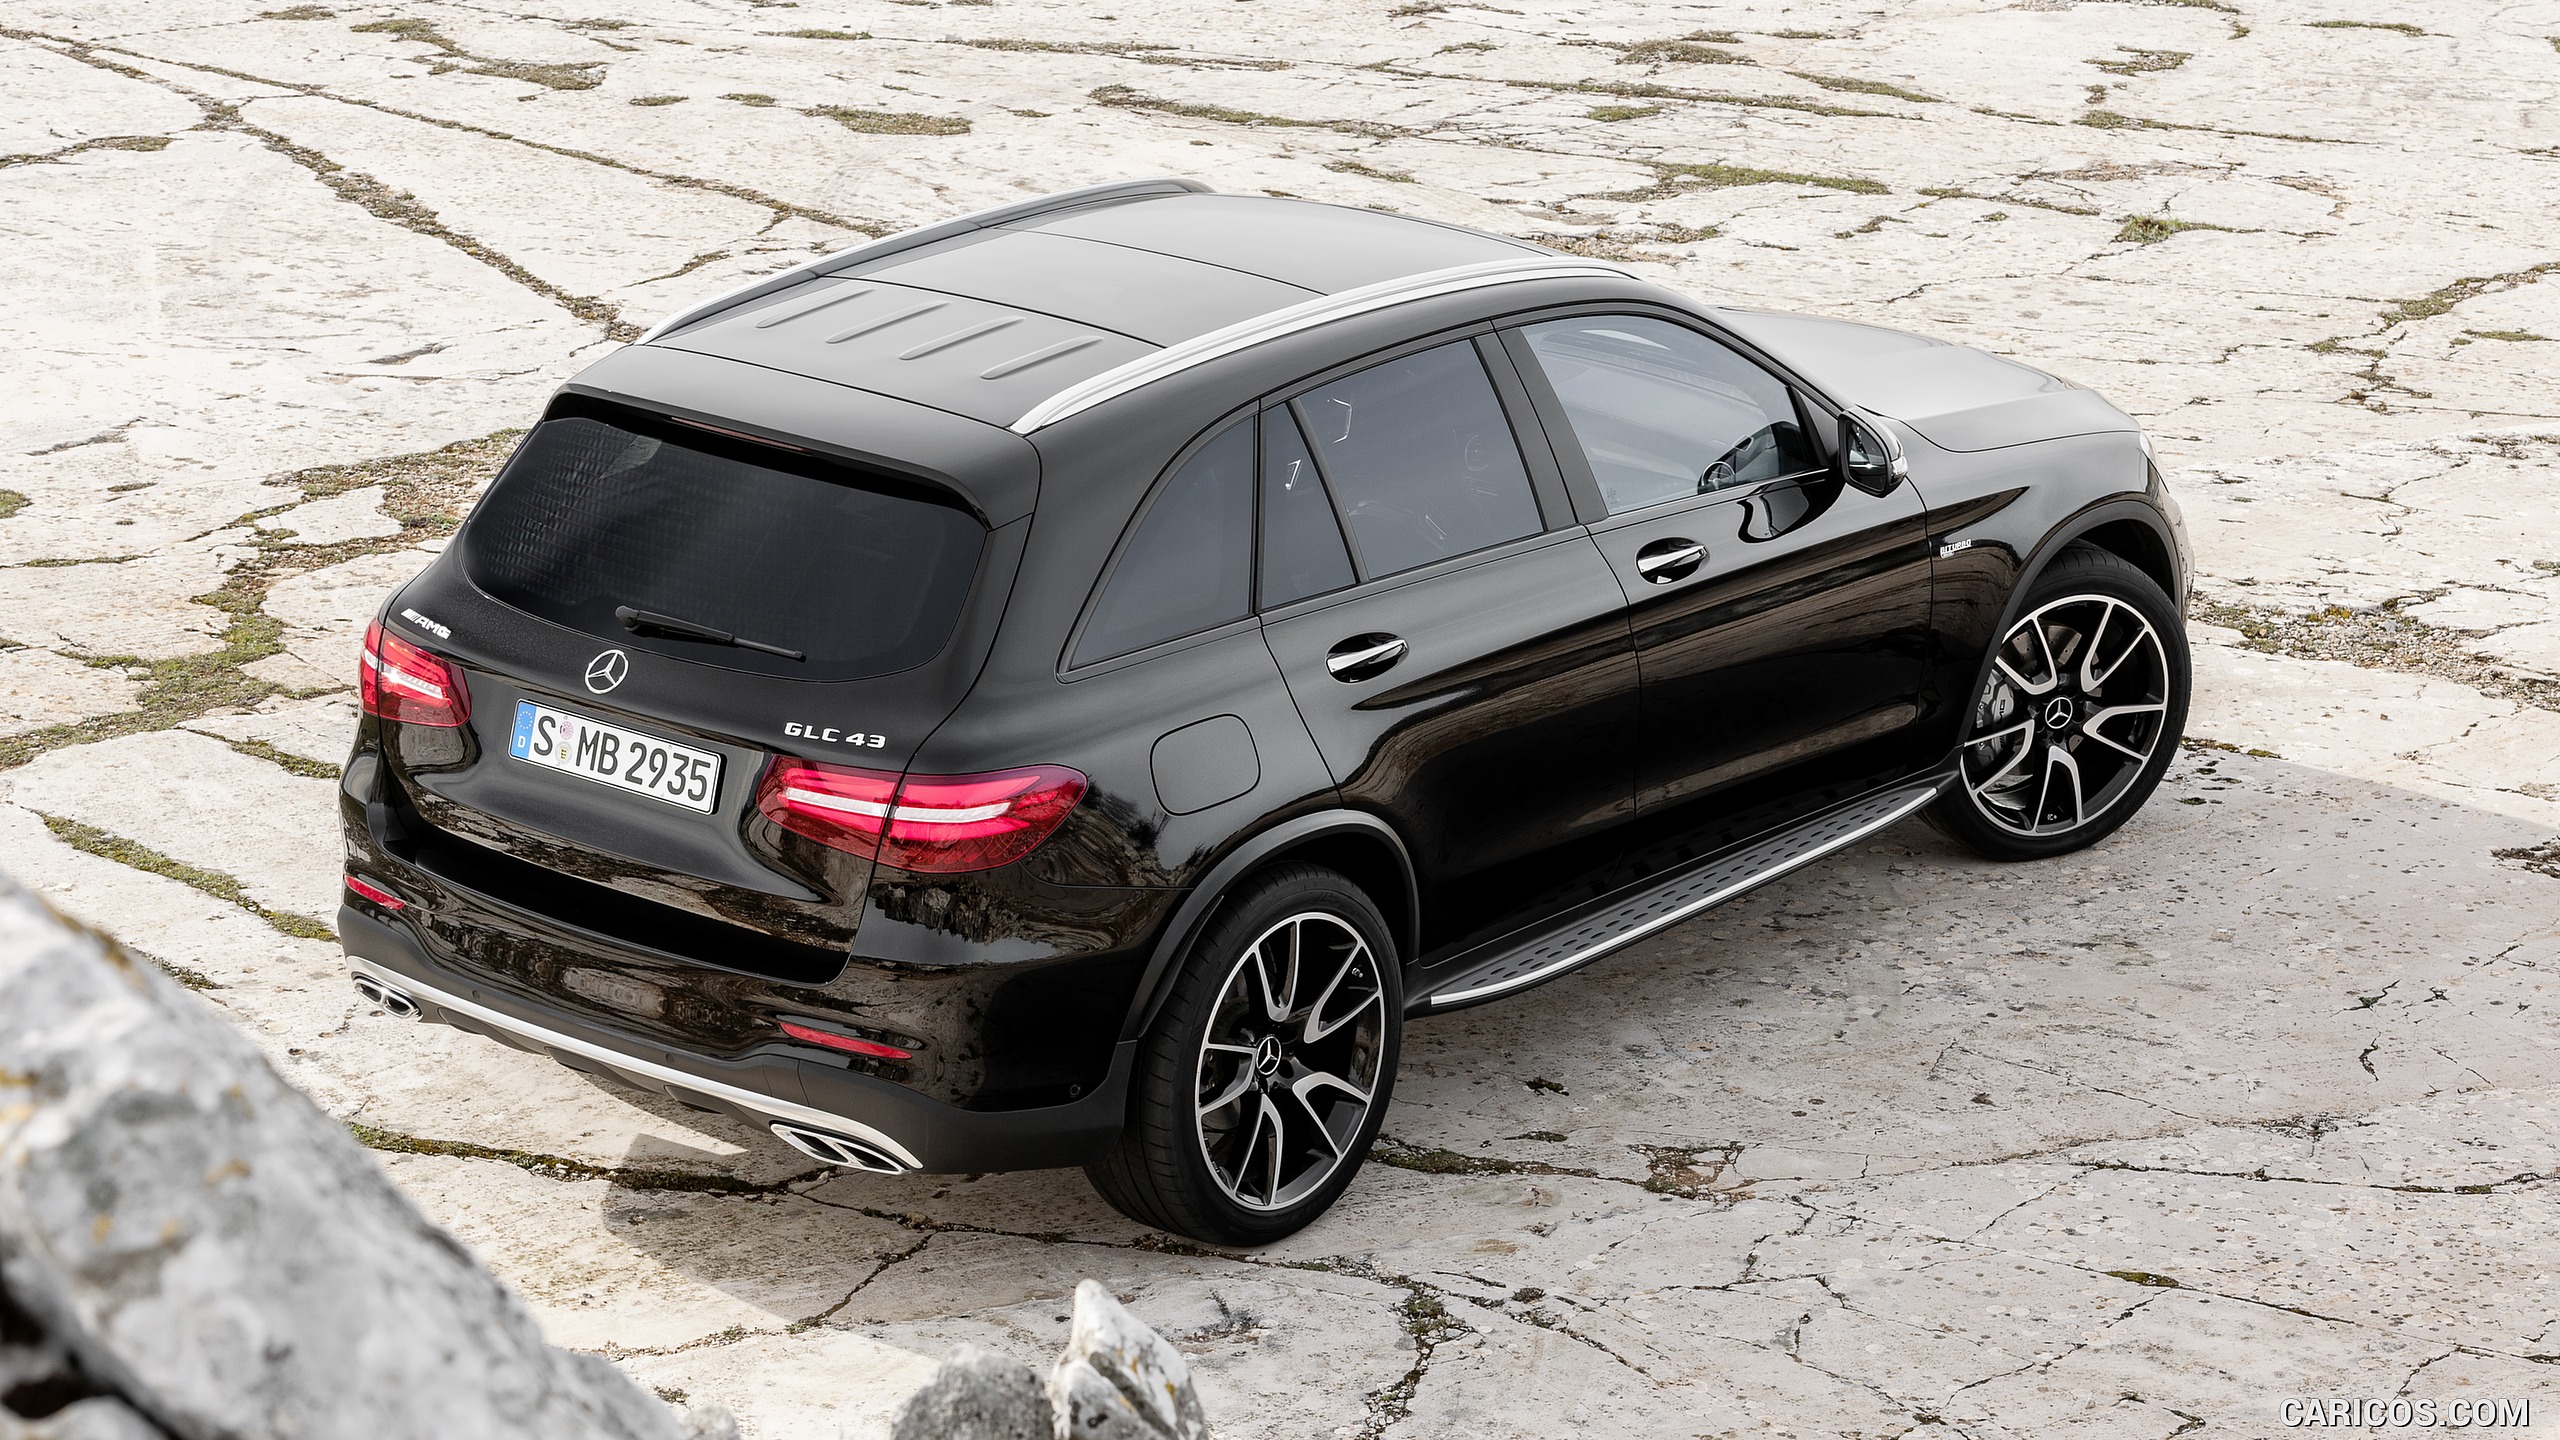 2017 Mercedes-AMG GLC 43 4MATIC (Chassis: X253, Color: Obsidian Black) - Top, #15 of 108